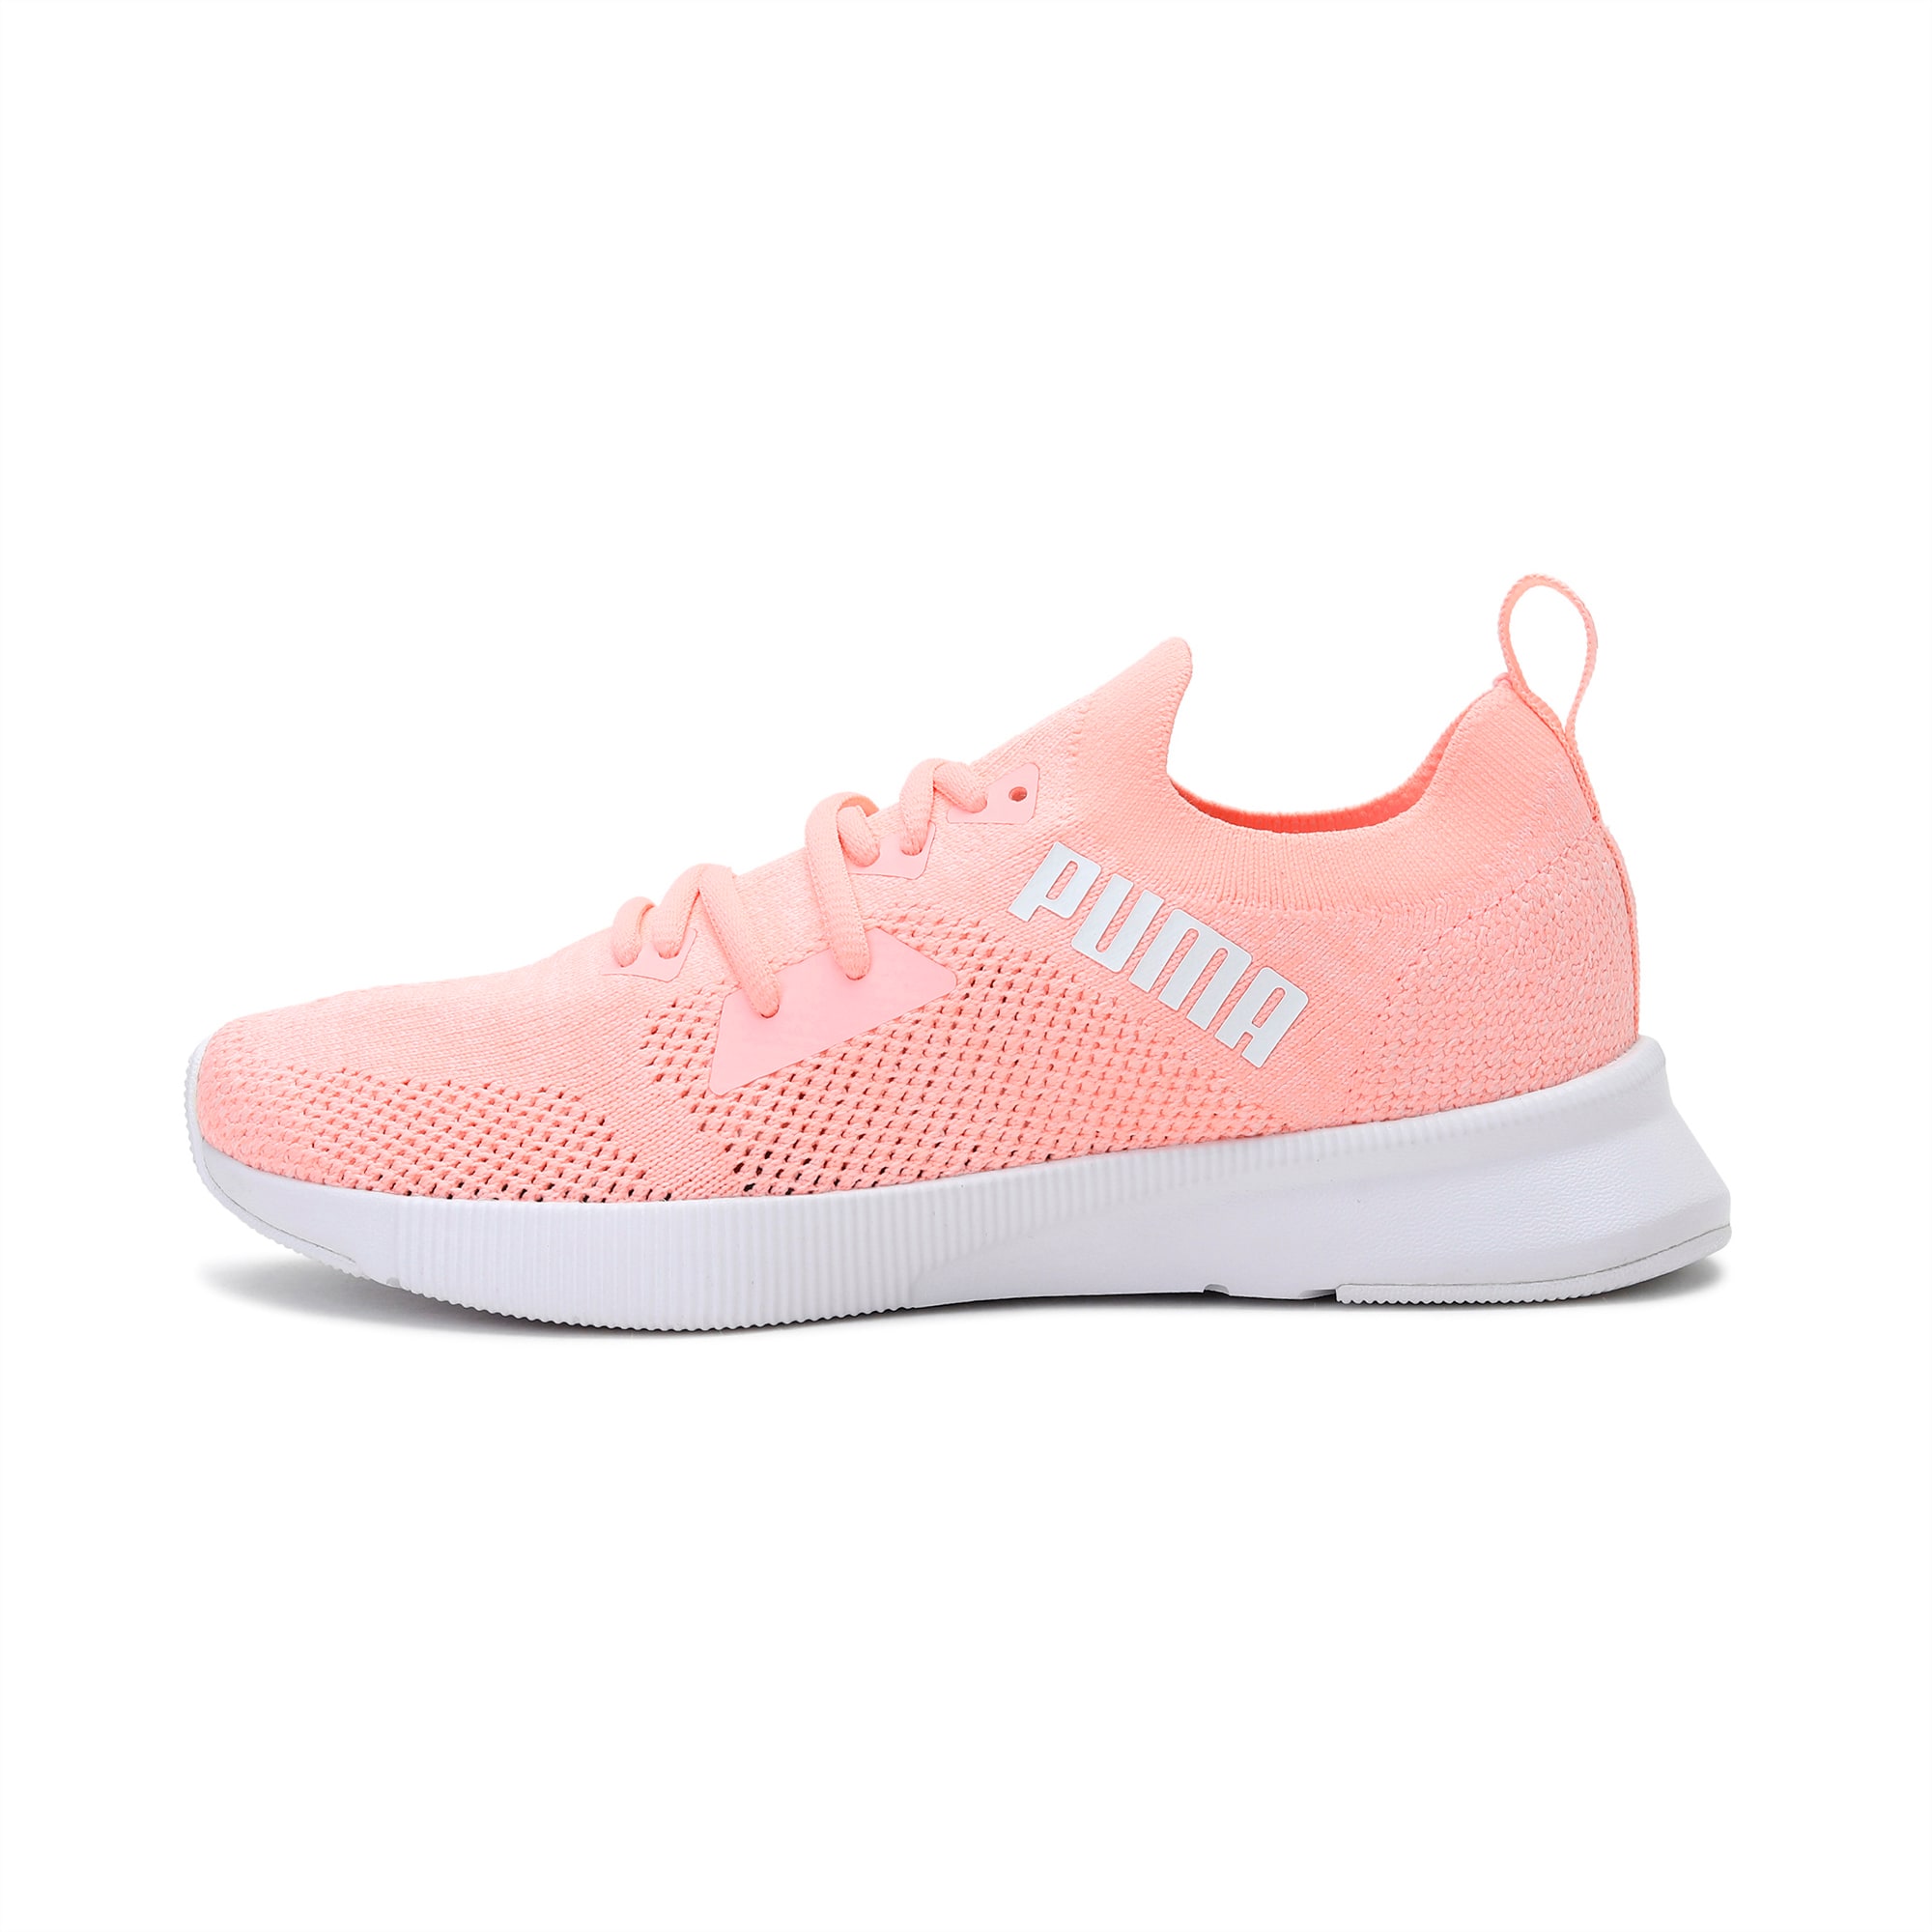 PUMA Chaussure Flyer hardloopschoenen dames pour Femme, Rose/Blanc, Taille 37, Chaussures